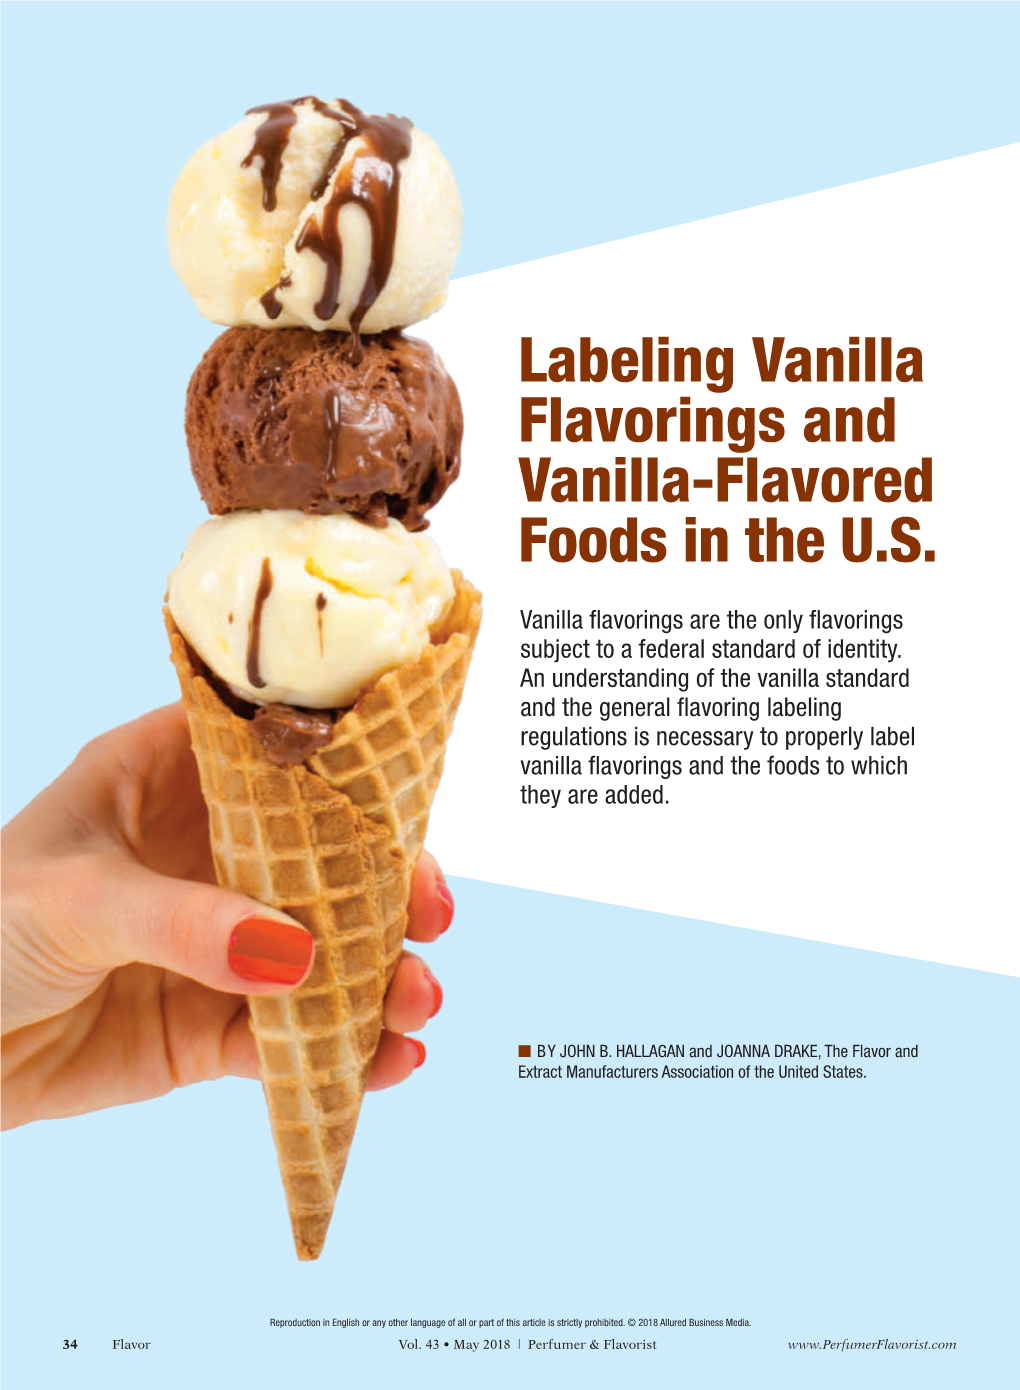 Labeling Vanilla Flavorings and Vanilla-Flavored Foods in the U.S